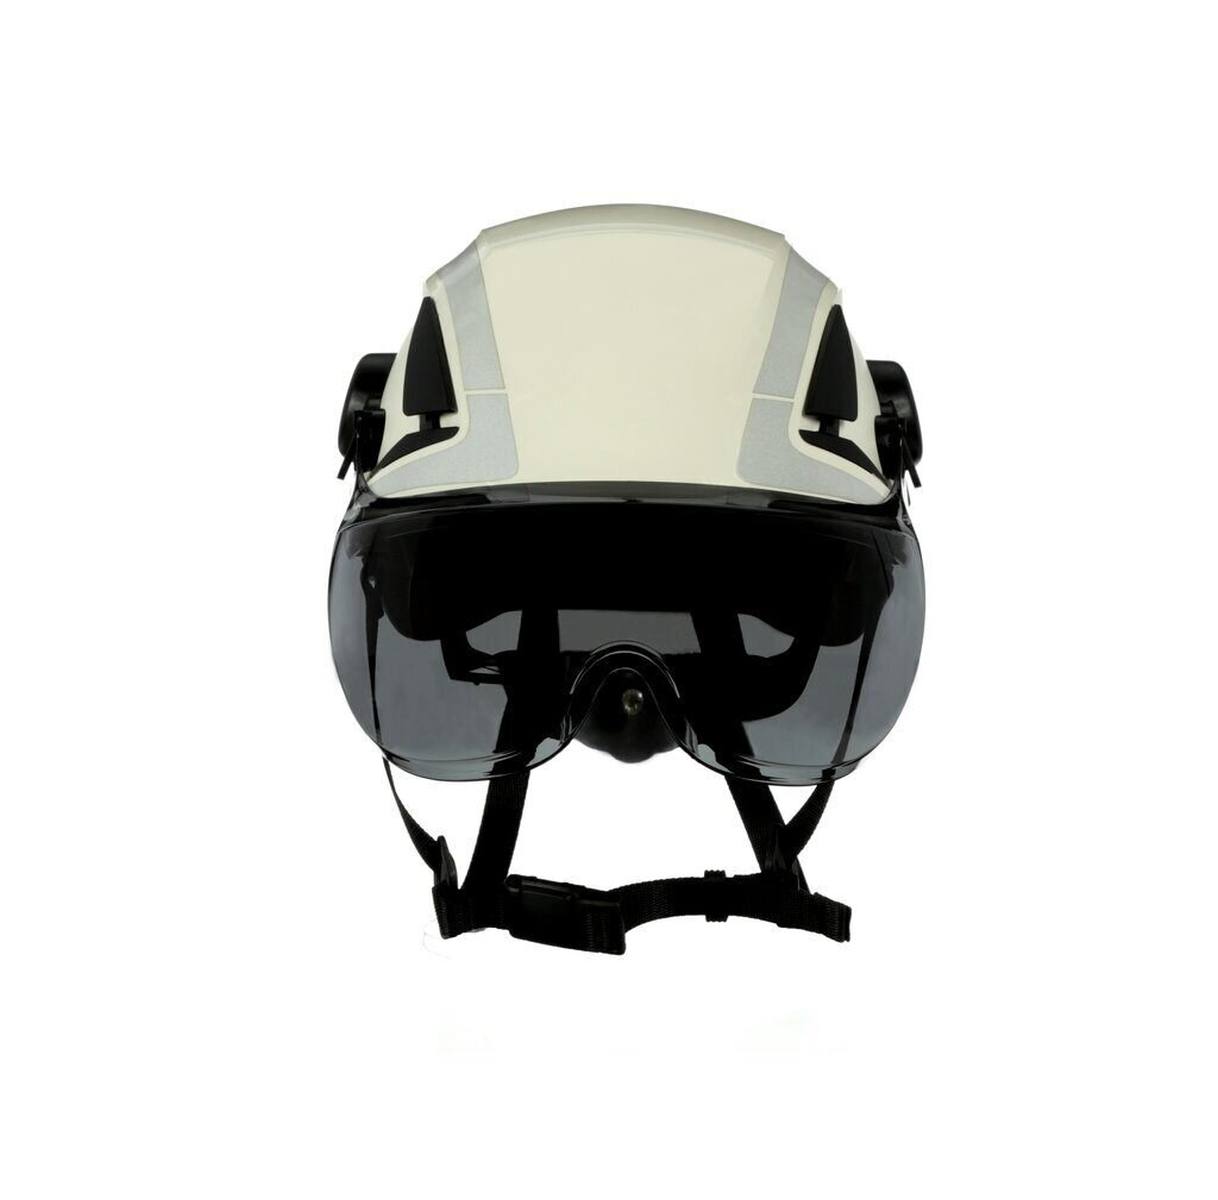 3M short visor X5-SV02-CE for safety helmets X5000 and X5500, gray, anti-fog and anti-scratch coating, polycarbonate